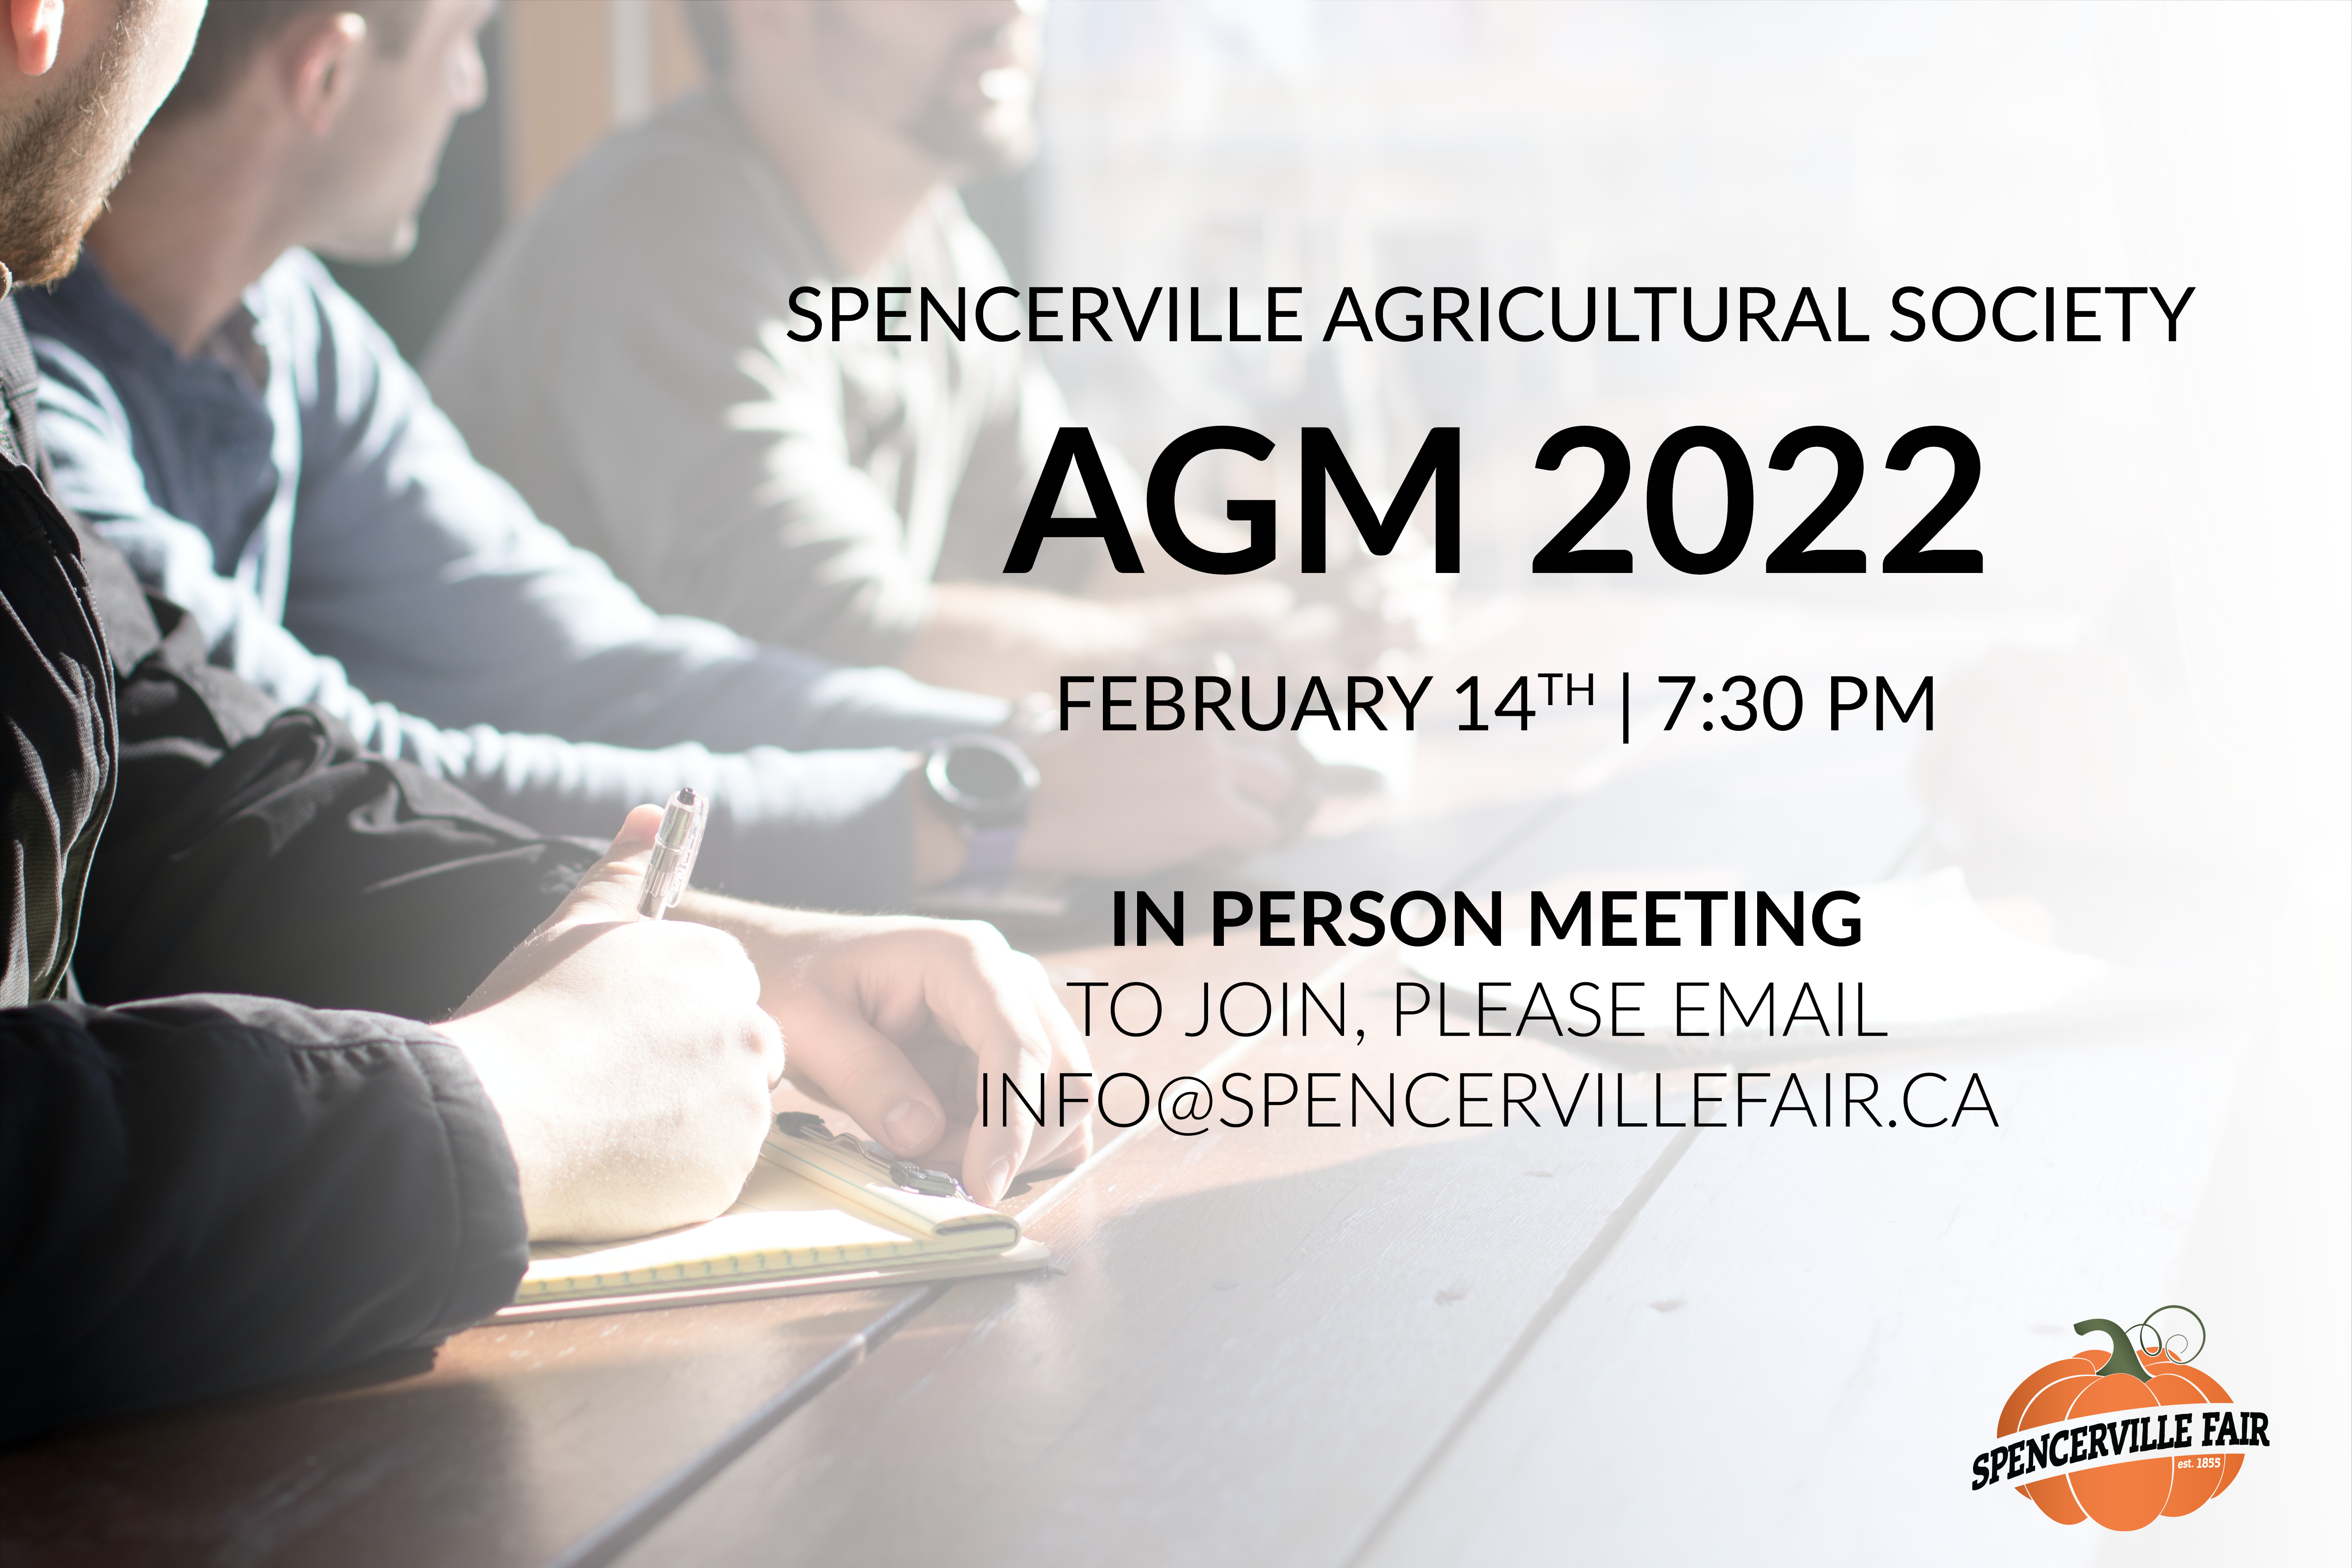 Spencerville Agricultural Society - Annual Meeting @ Spencerville | Ontario | Canada